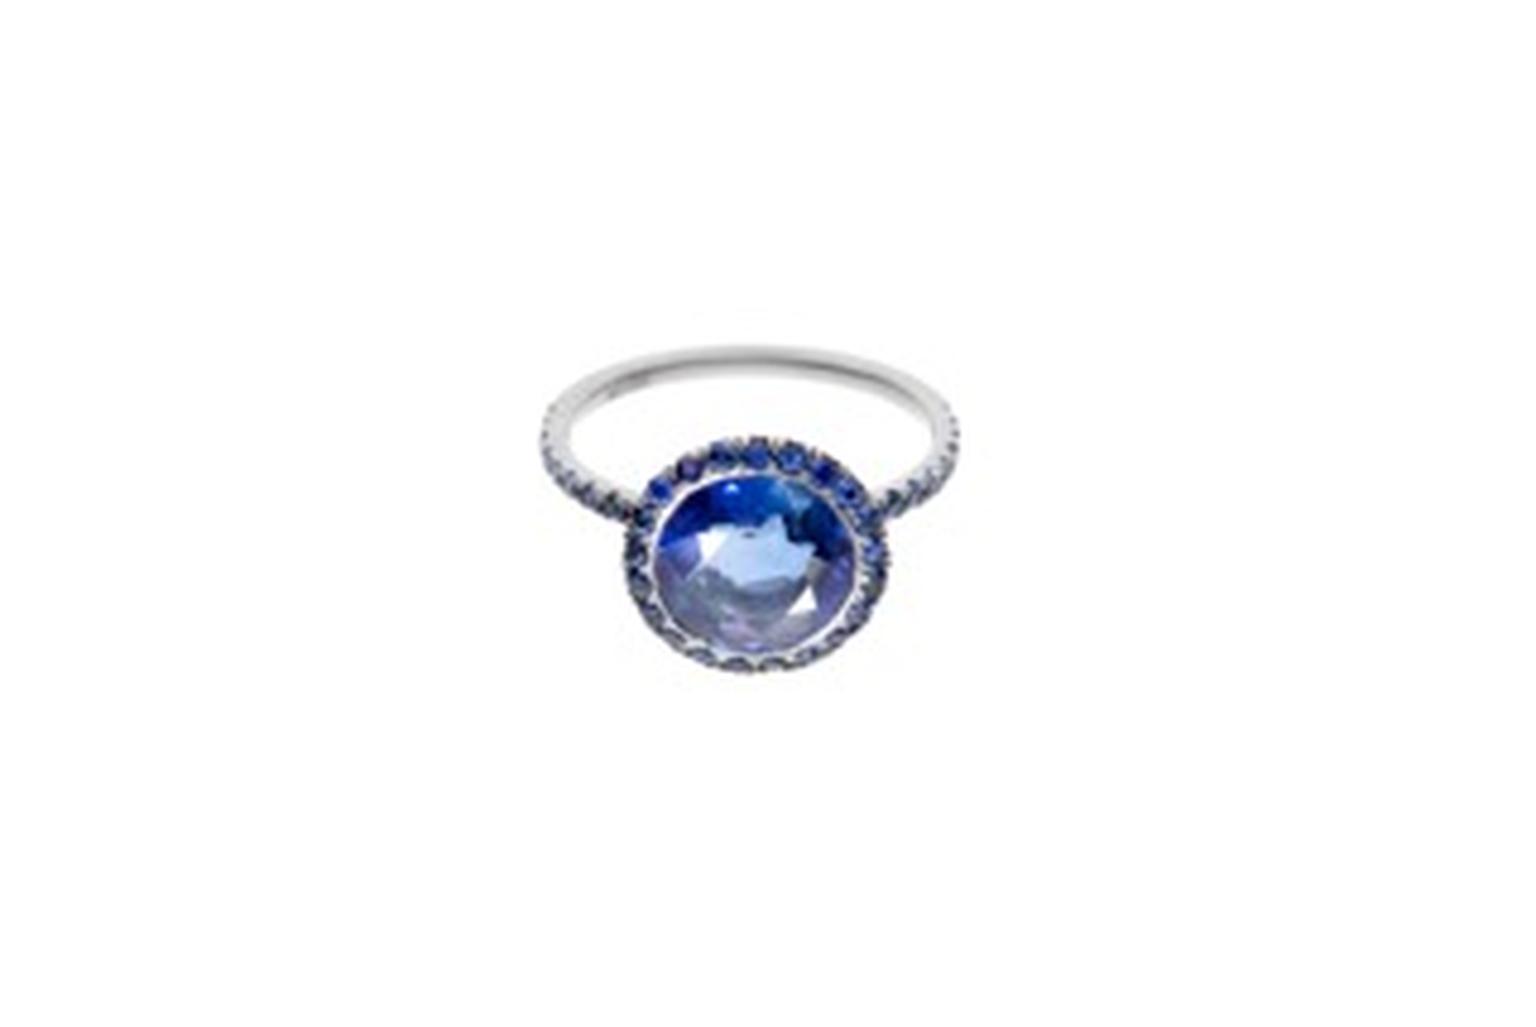 Samarbejde tryk gift William Welstead ring featuring a central sapphire